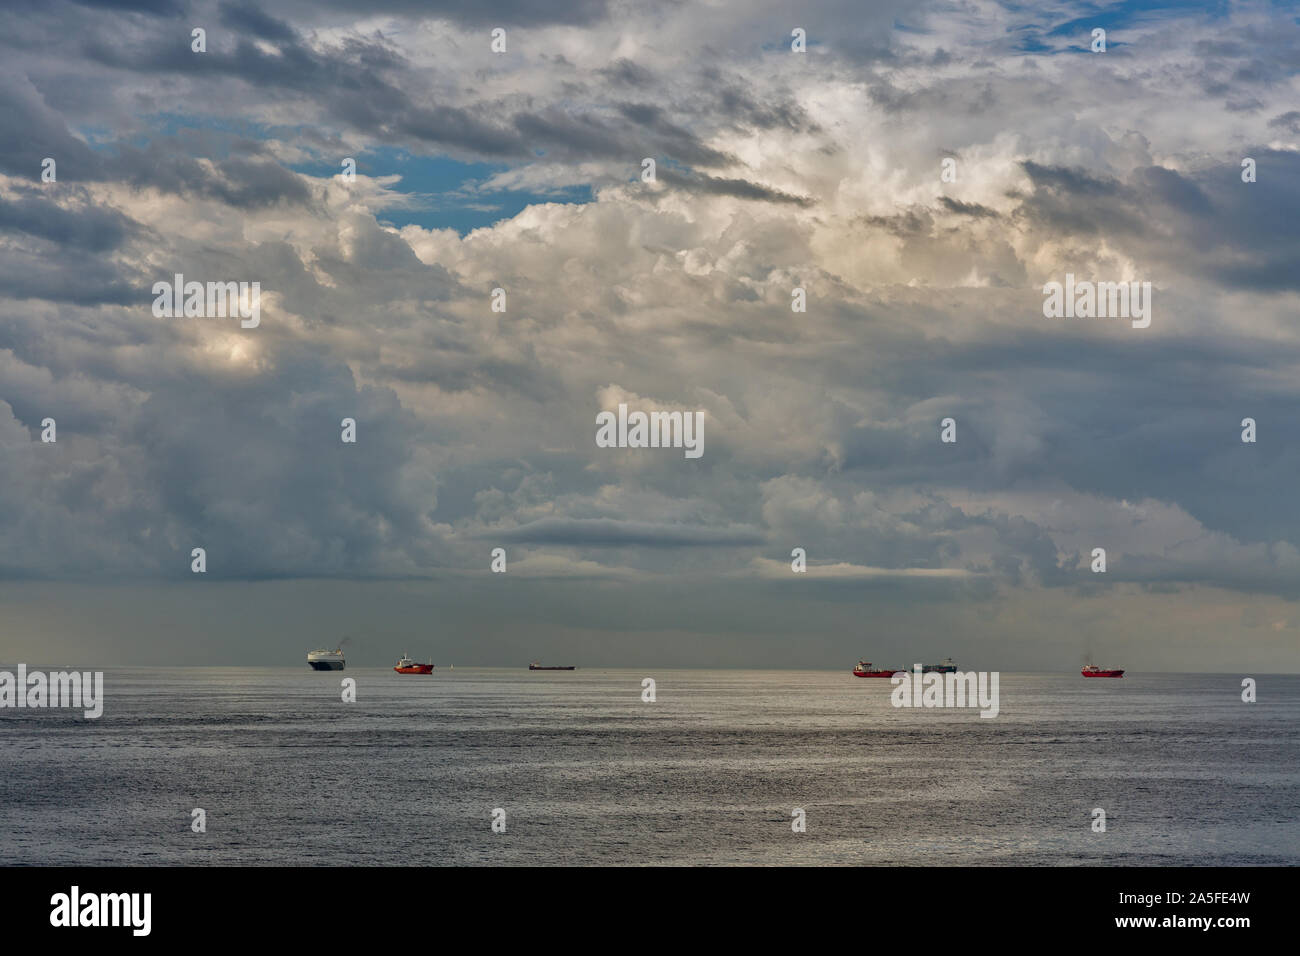 Ships on the roadstead in the open water with dramatic clouds. Livorno, Italy. Stock Photo